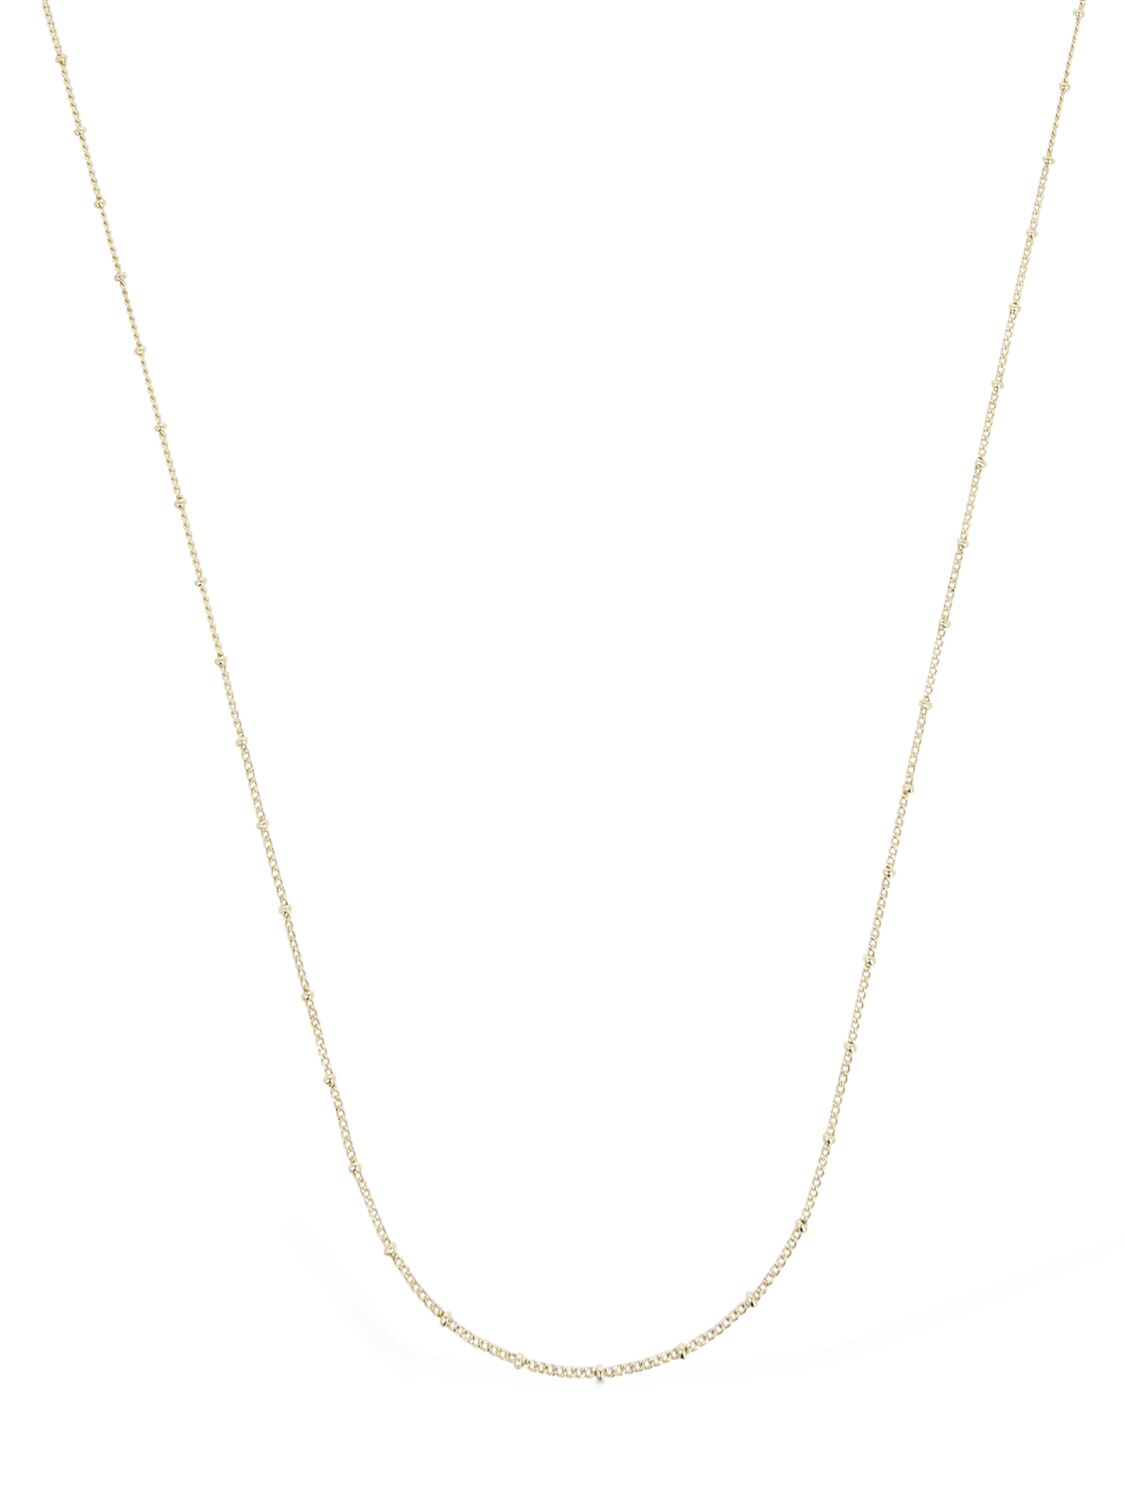 Federica Tosi Lace Camille Long Chain Necklace In Gold